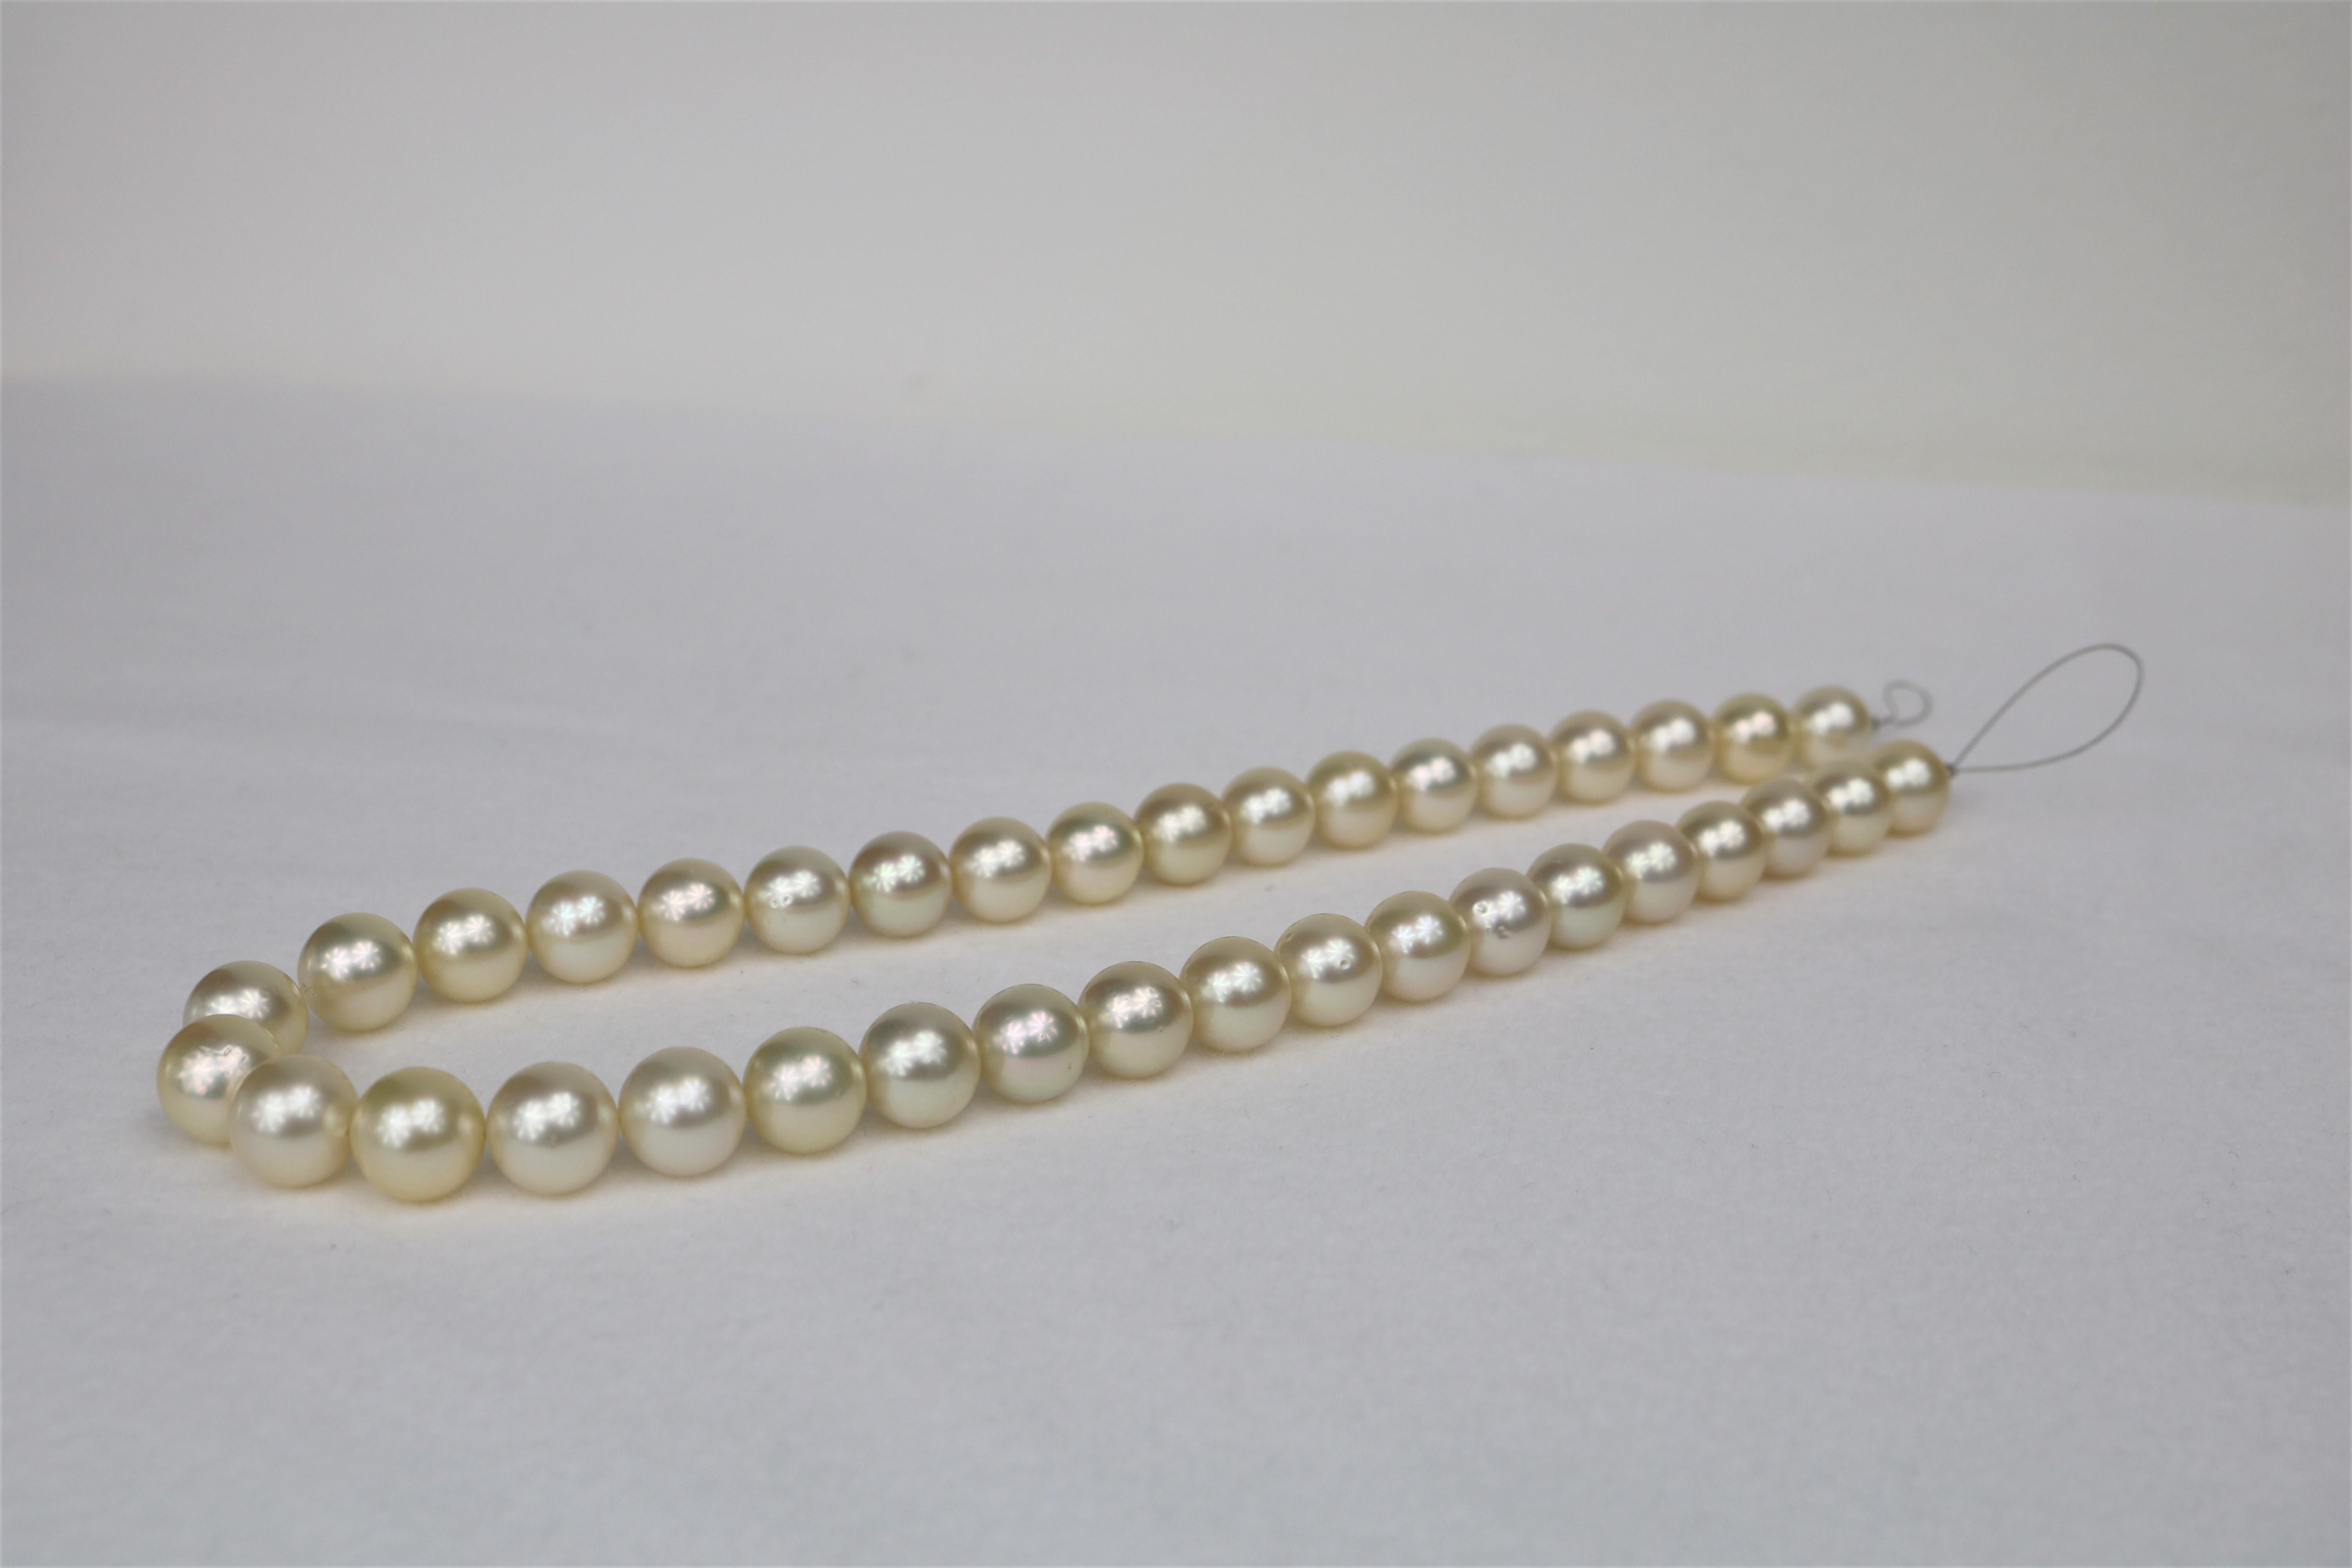 10-12mm Champagne South Sea Round Necklace with Gold Clasp
Champagne Color South Sea Round, AAA Luster, 18 inches hand knotted with gold fishhook clasp #CP38
